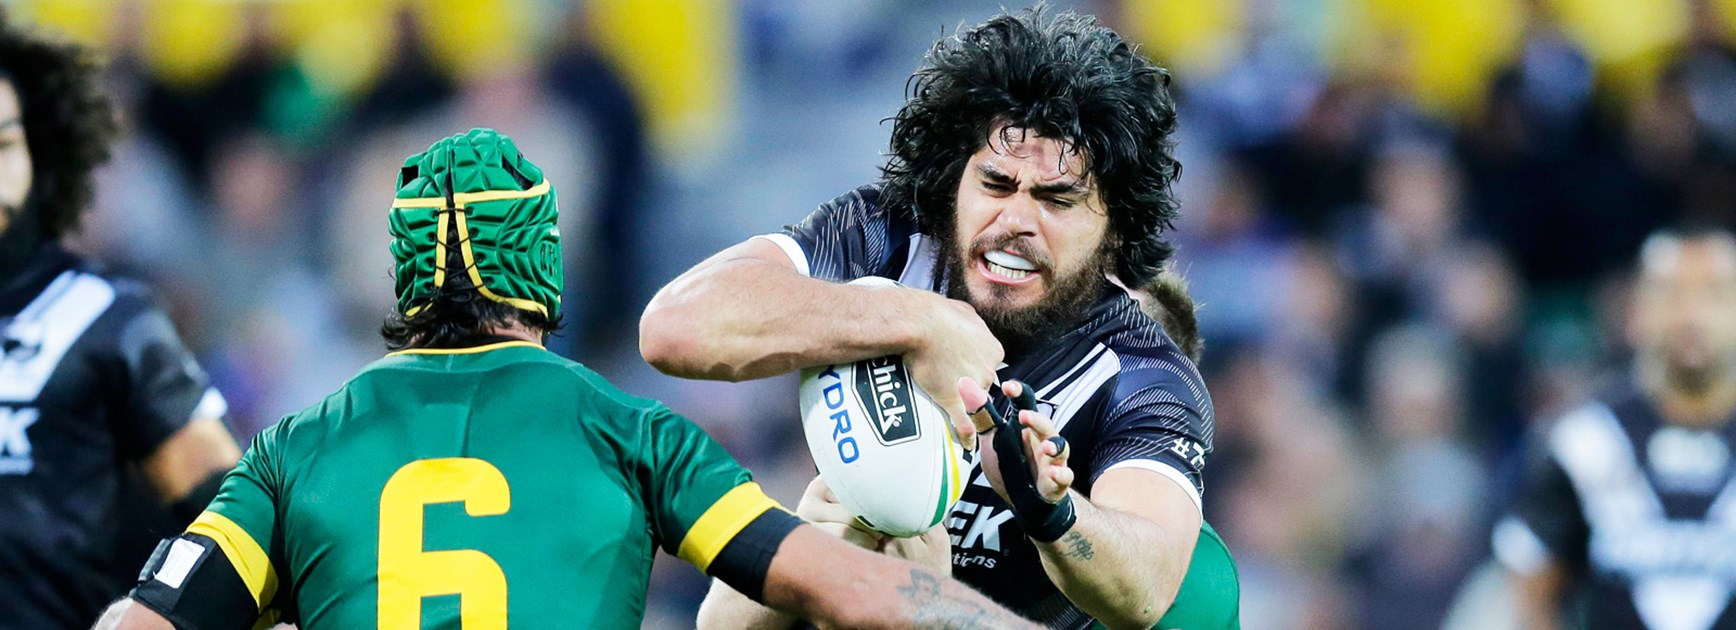 Kiwis star Tohu Harris has signed a four-year deal with the Warriors, starting 2018.